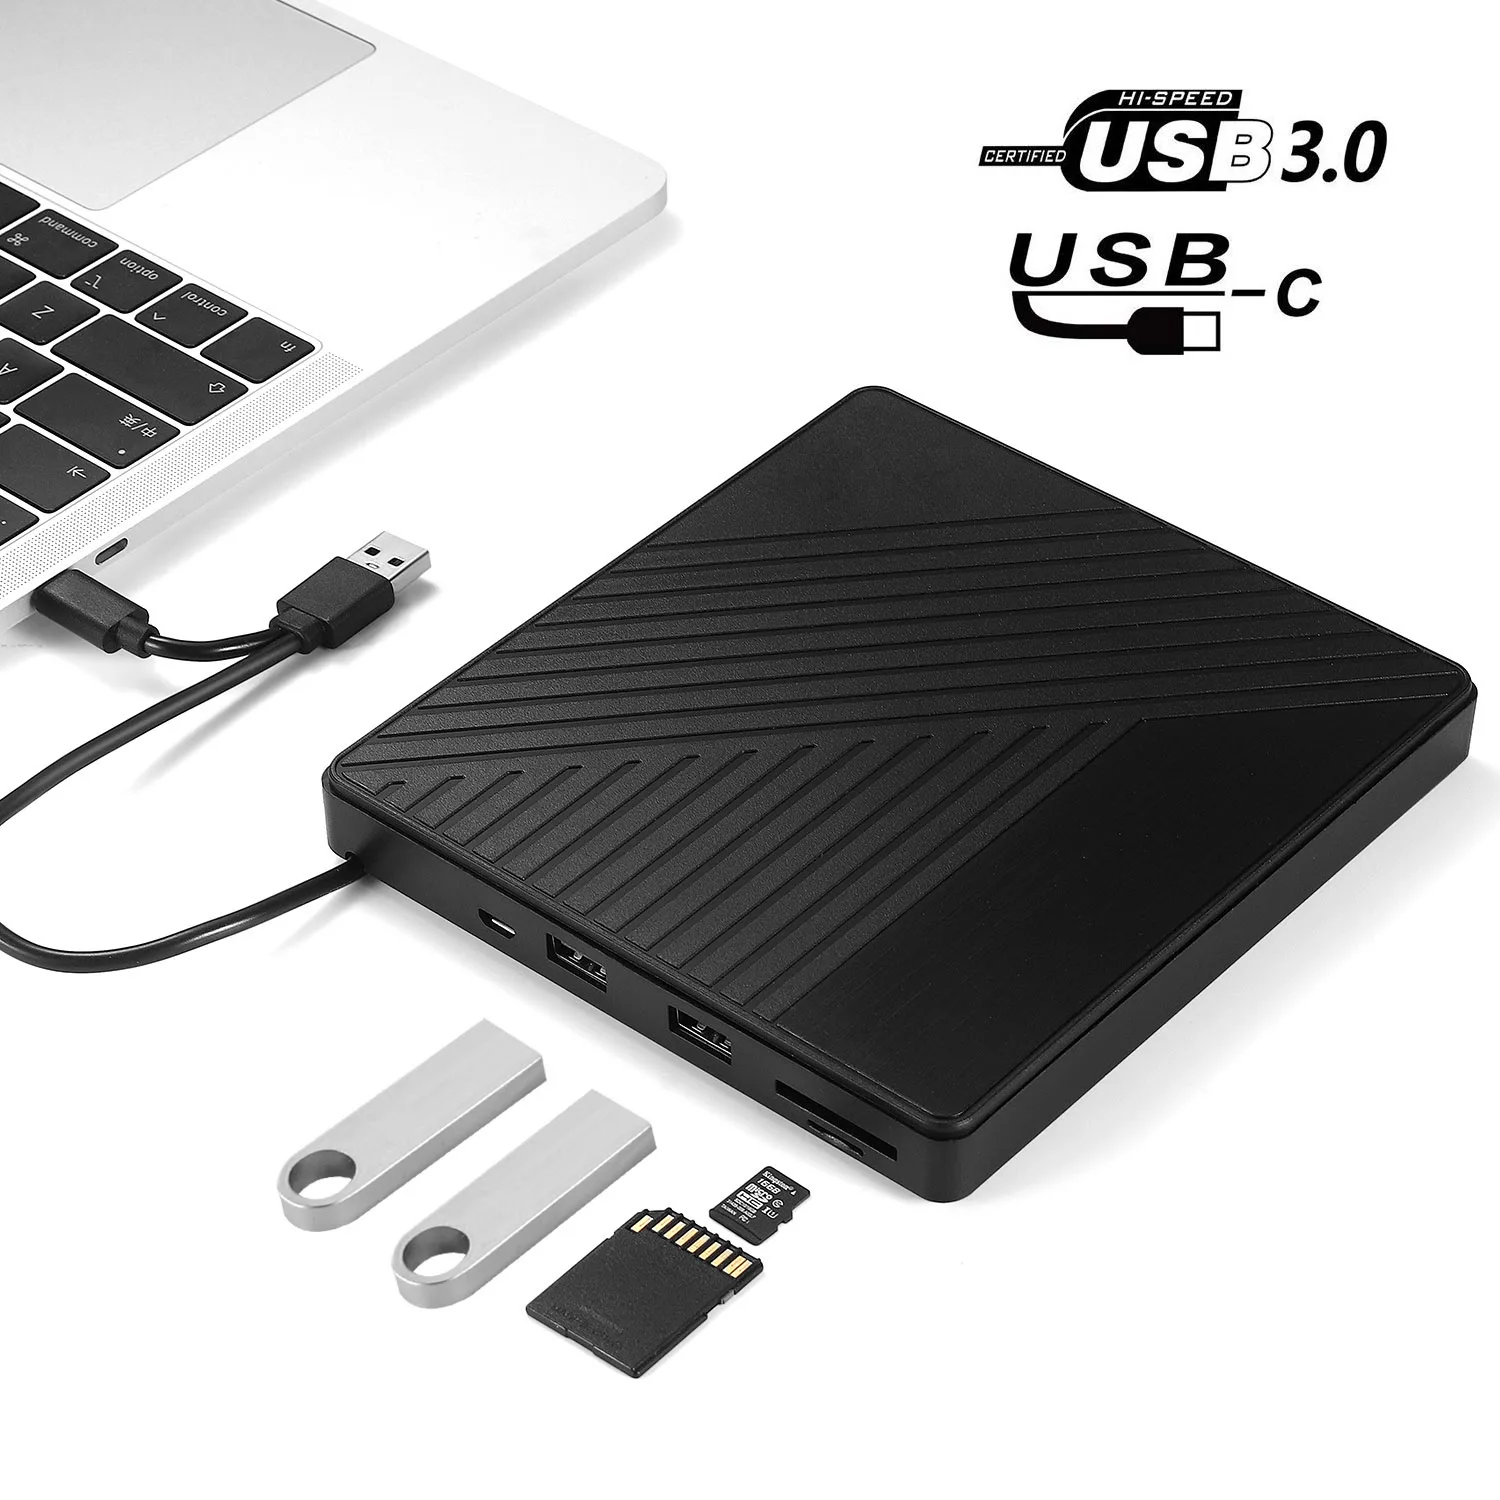 ORICO USB 3.0 External DVDRW Portable / RW Drive DVD/CD ROM Player Rewriter Burner Compatible with Laptop/PC for PC/Mac/Linux 